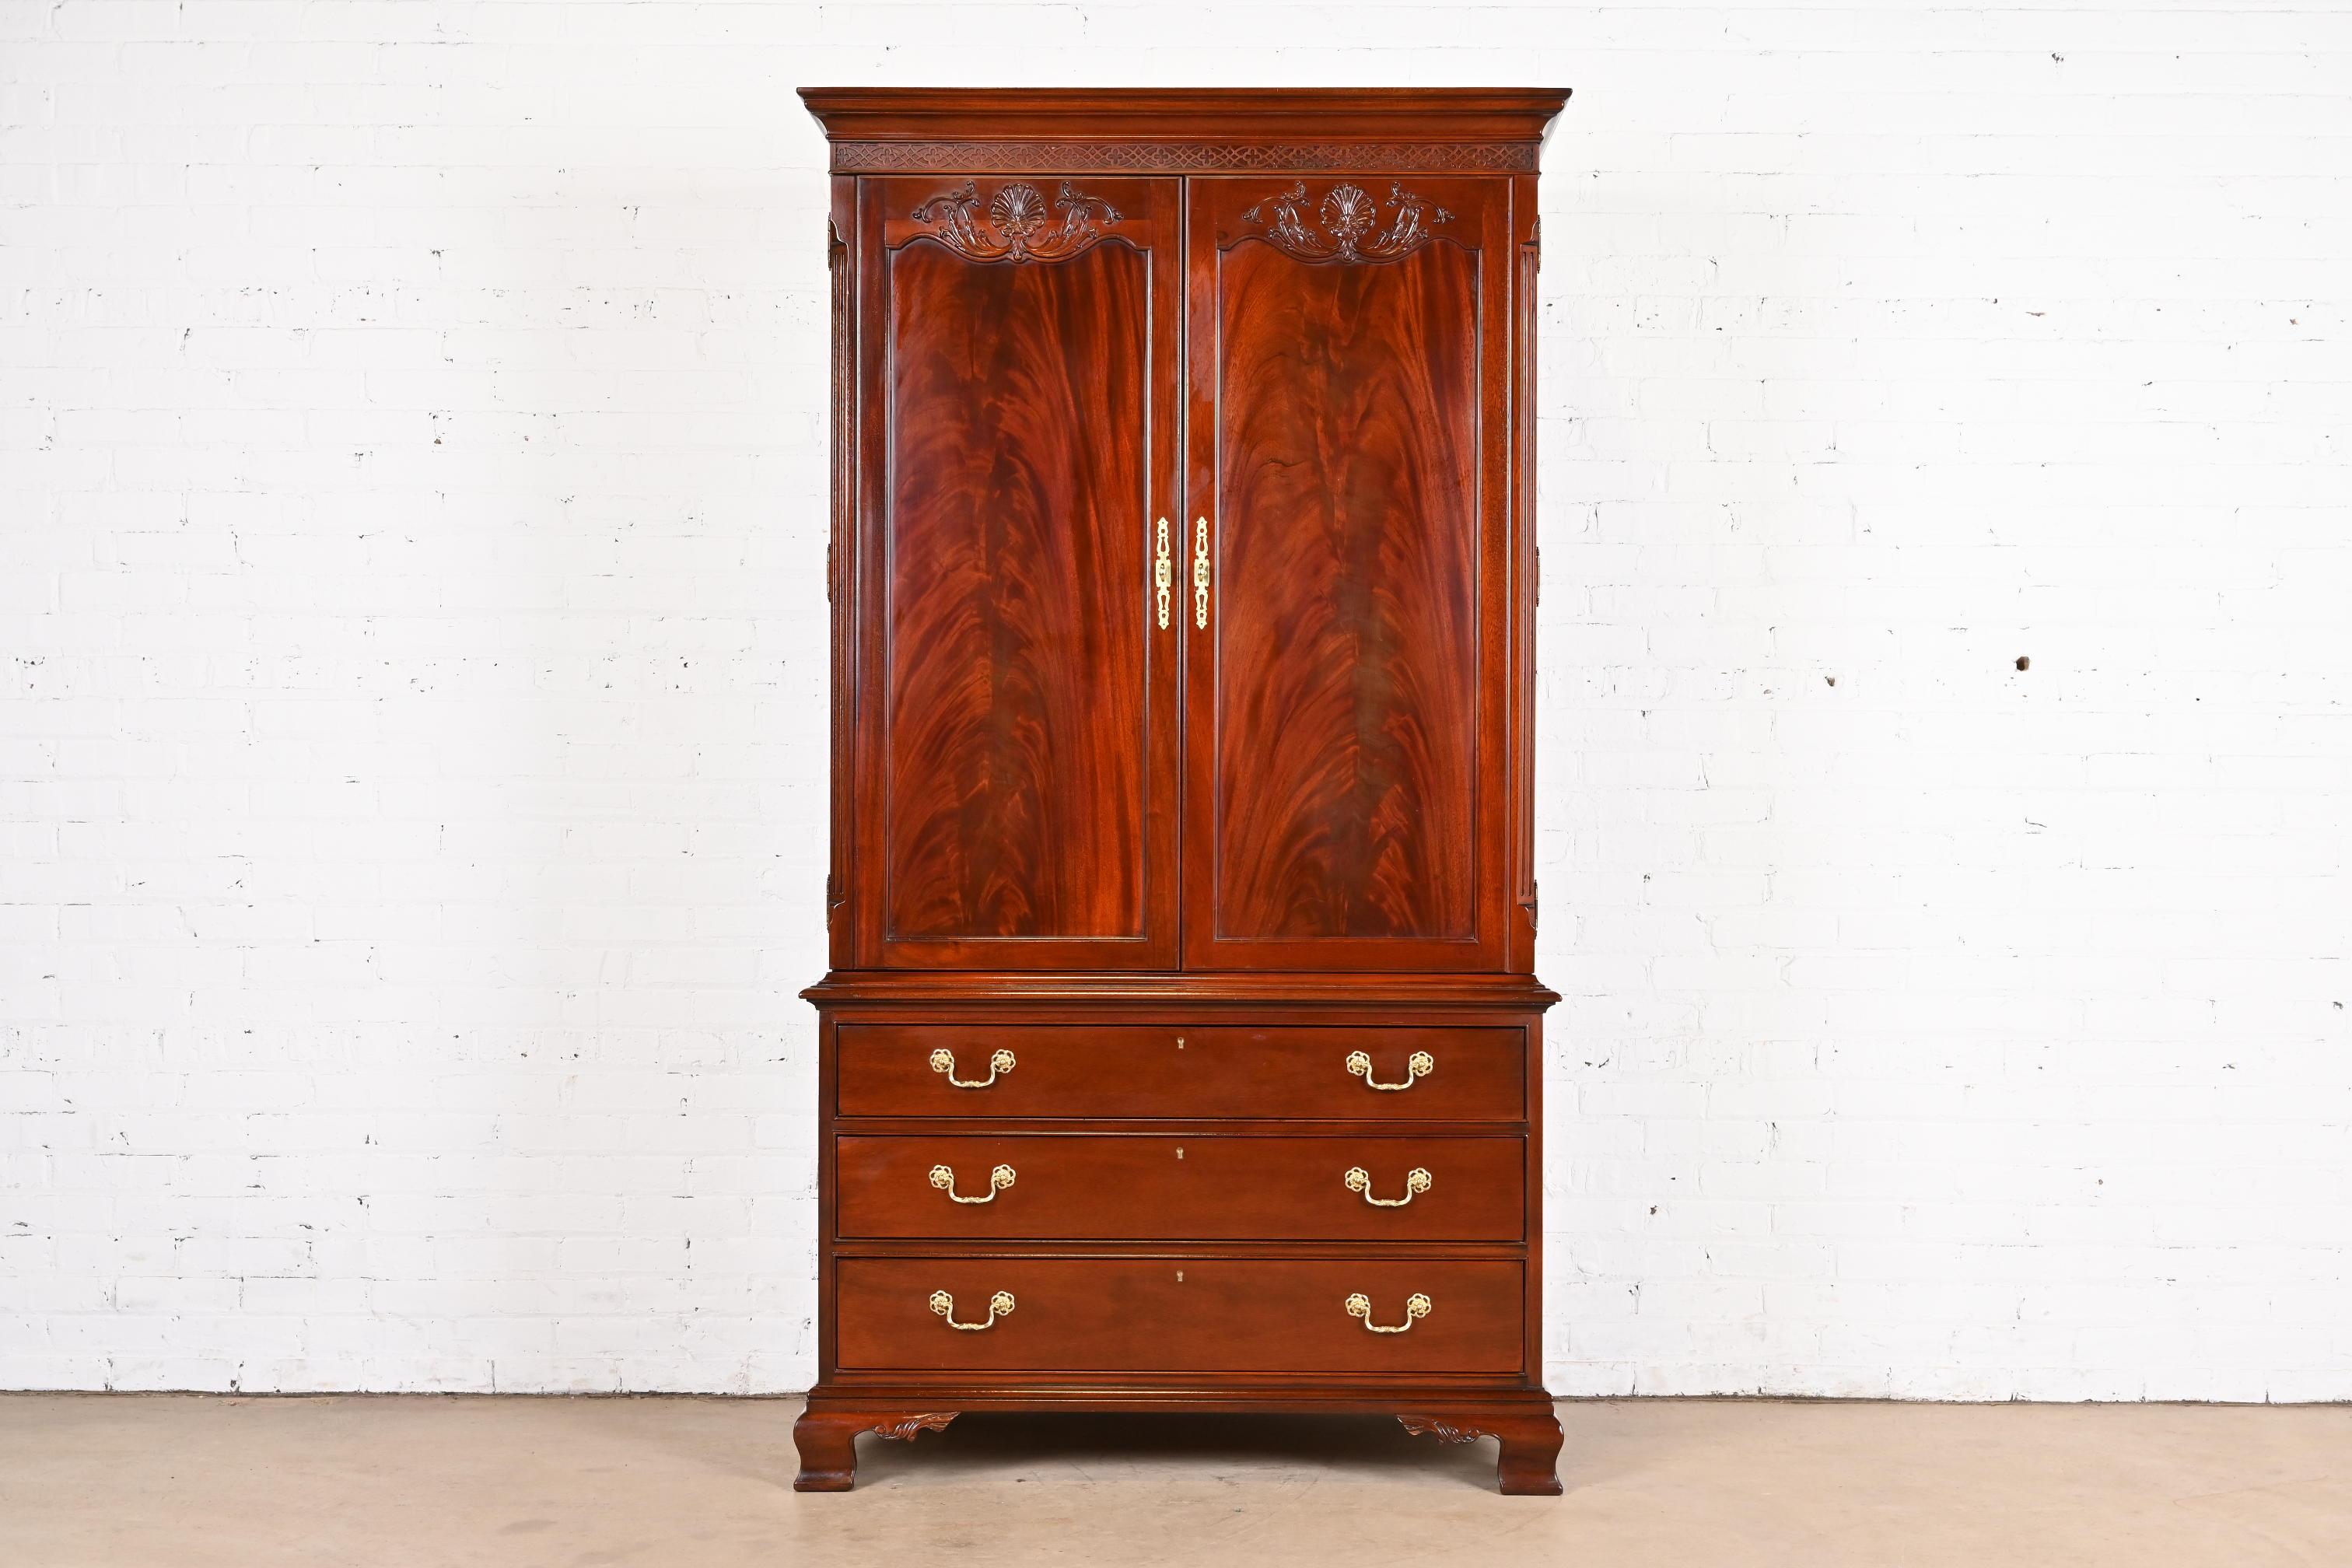 A gorgeous Georgian or Chippendale style armoire dresser or gentleman's chest

In the manner of Baker Furniture

USA, Circa 1980s

Carved flame mahogany, with original brass hardware.

Measures: 44.25